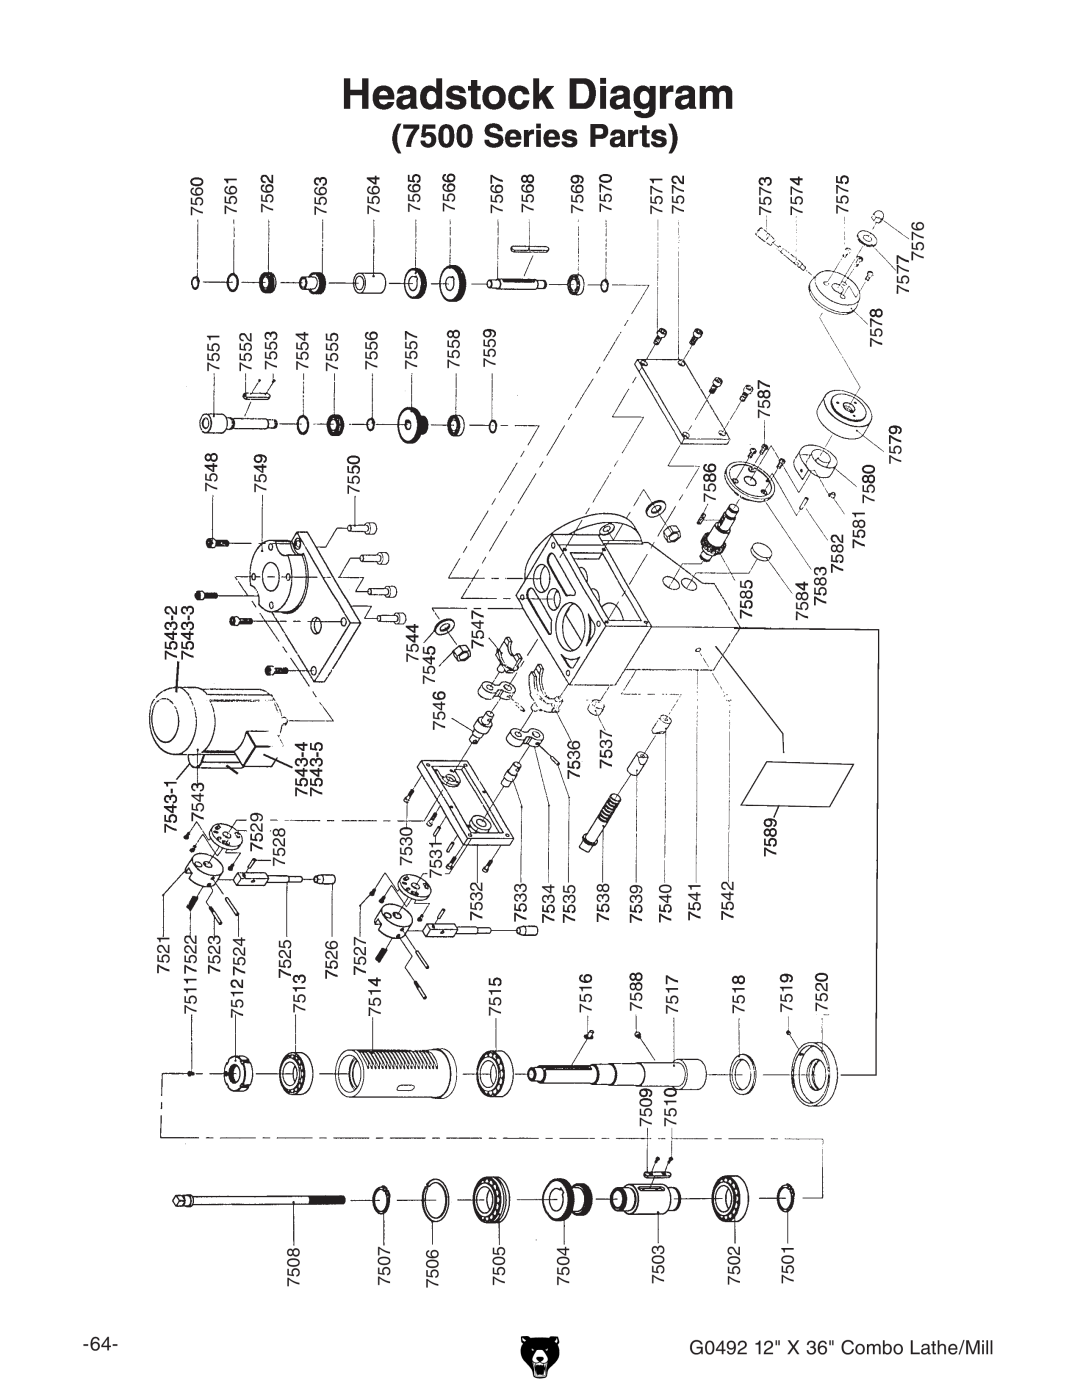 Grizzly G0492 owner manual Headstock Diagram, Series Parts 